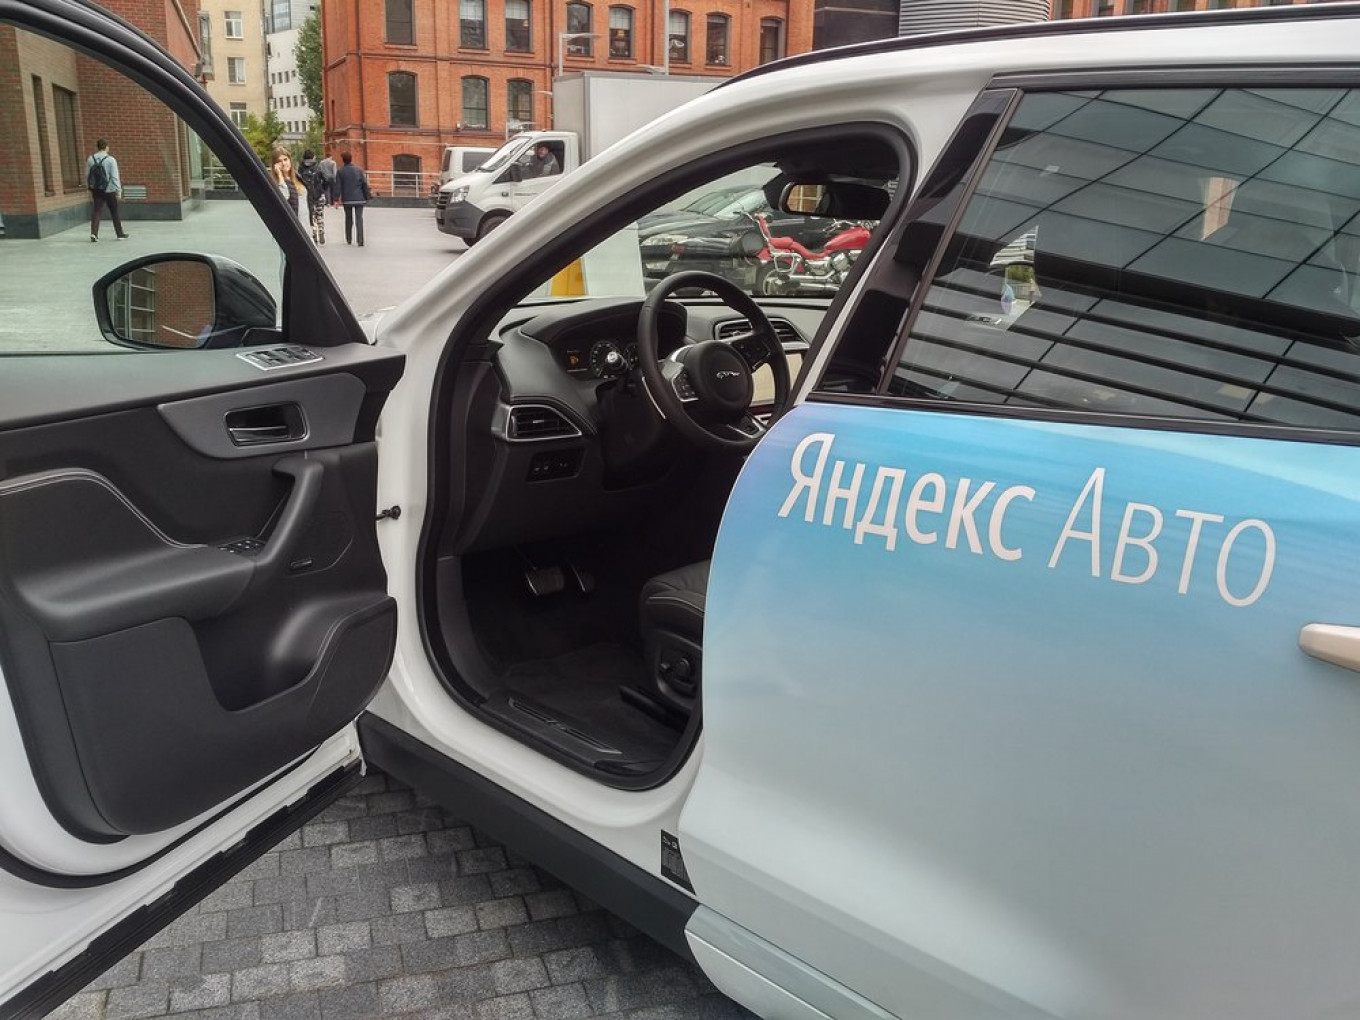 Hyundai Signs Deal With Russia’s Yandex for Autonomous Cars